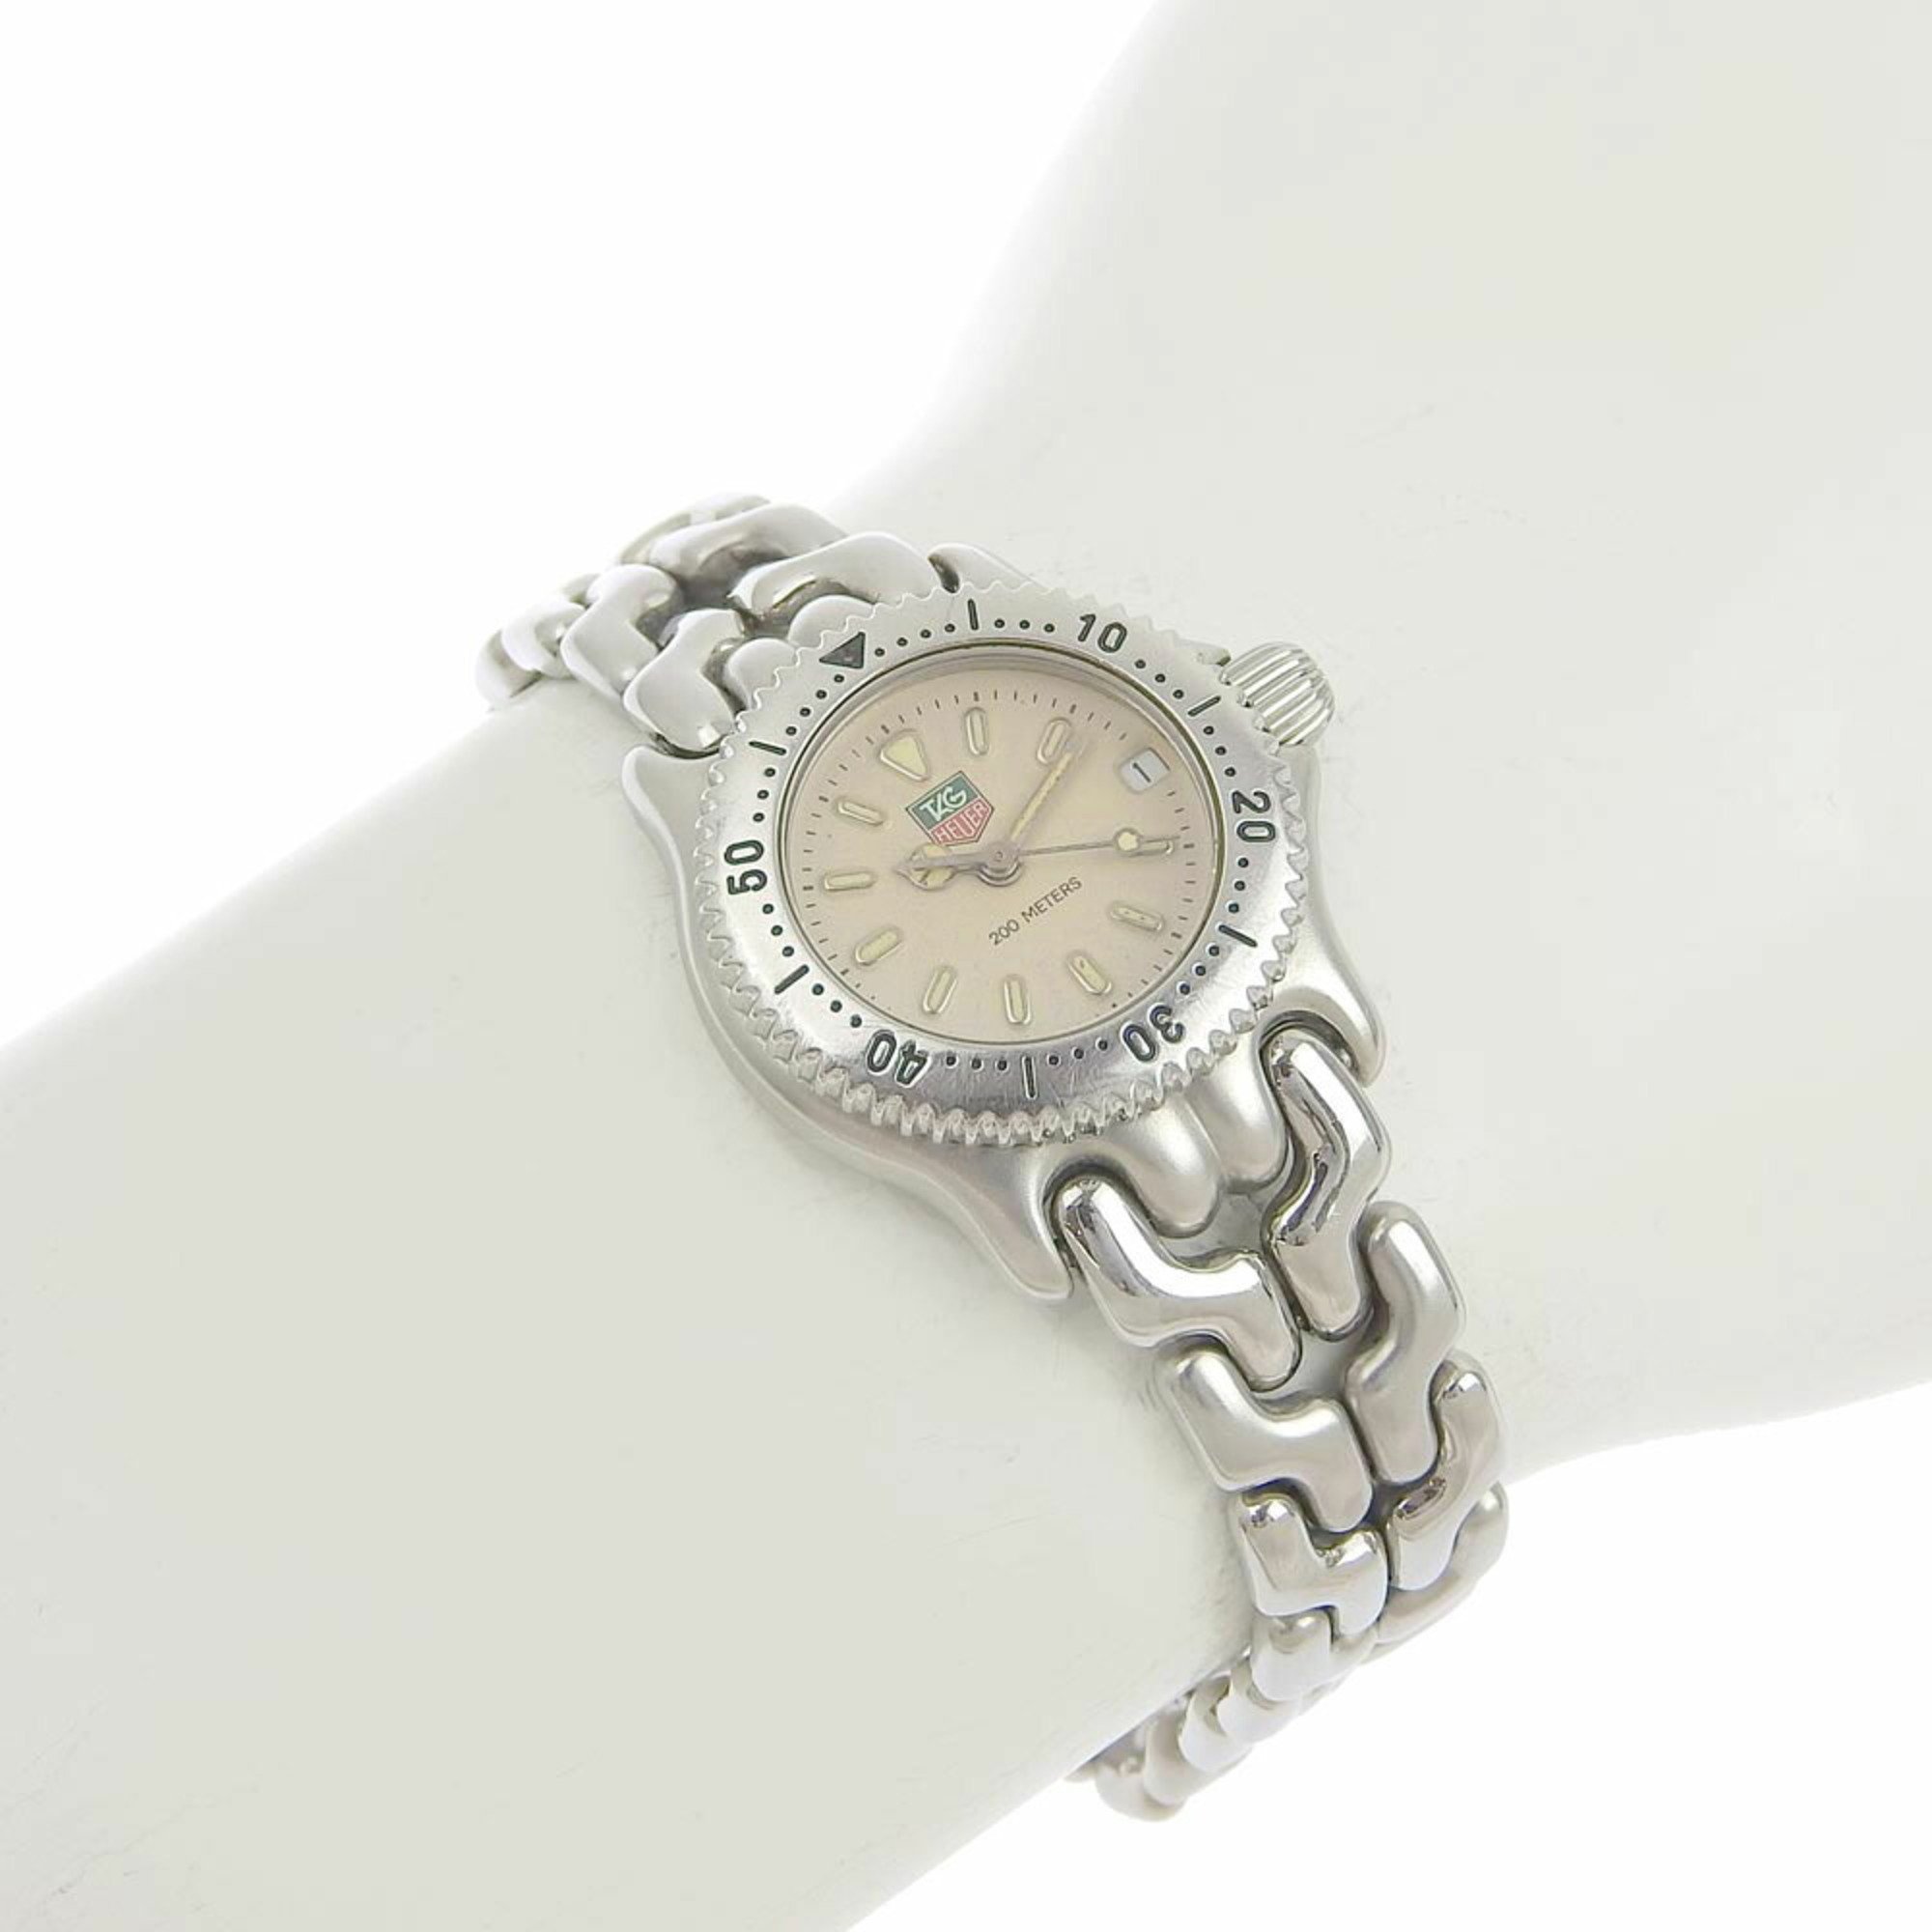 Tag Heuer TAG HEUER Cell Professional Women's Quartz Battery Watch Cream Dial S99 008M